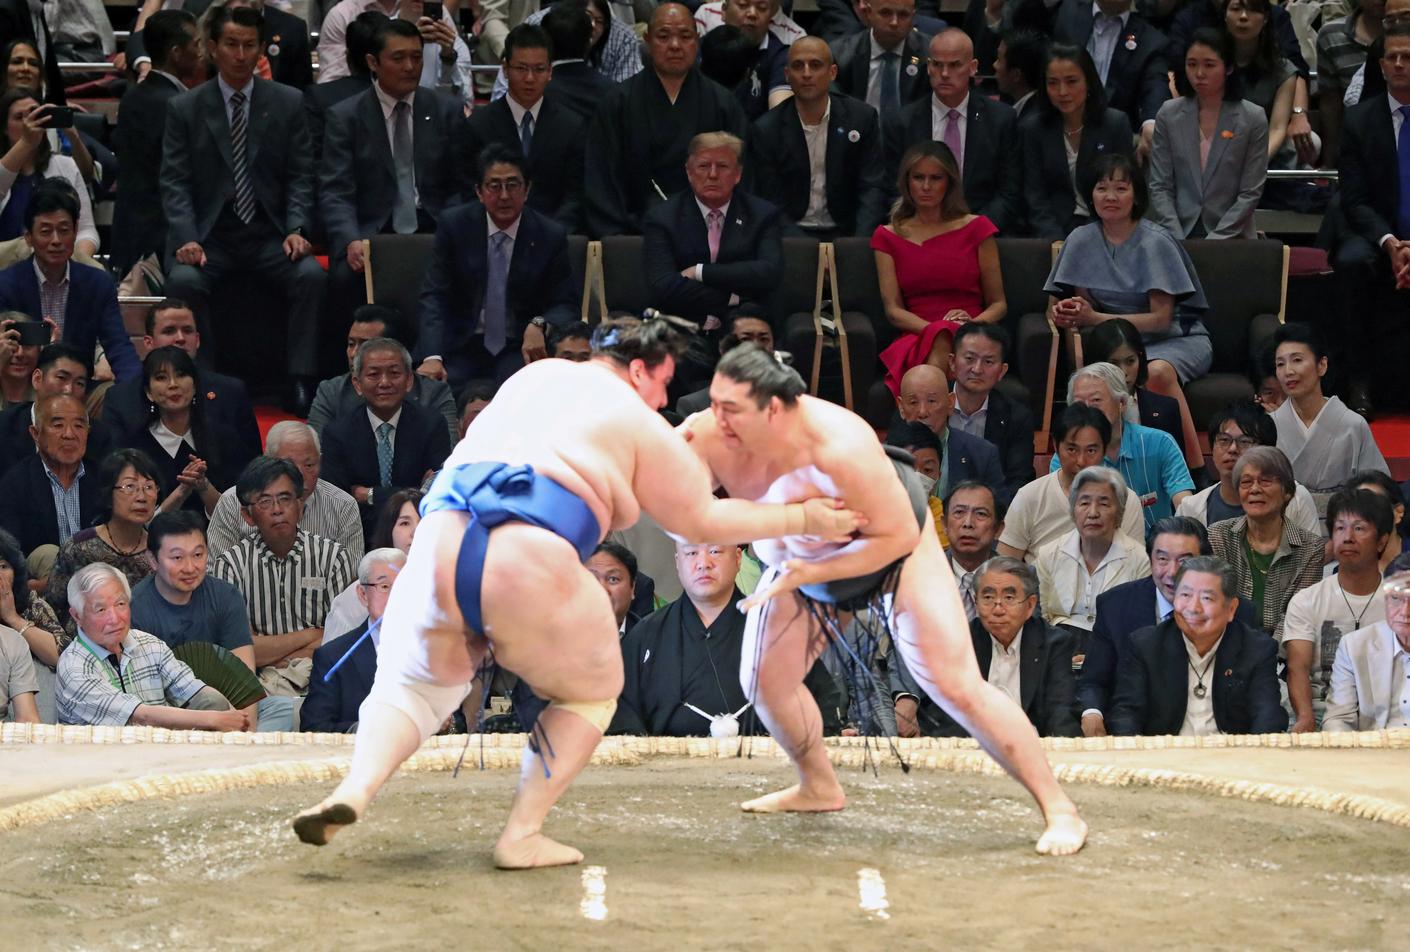 Trade beef aside, Trump and Abe bond over burgers, sumo and golf